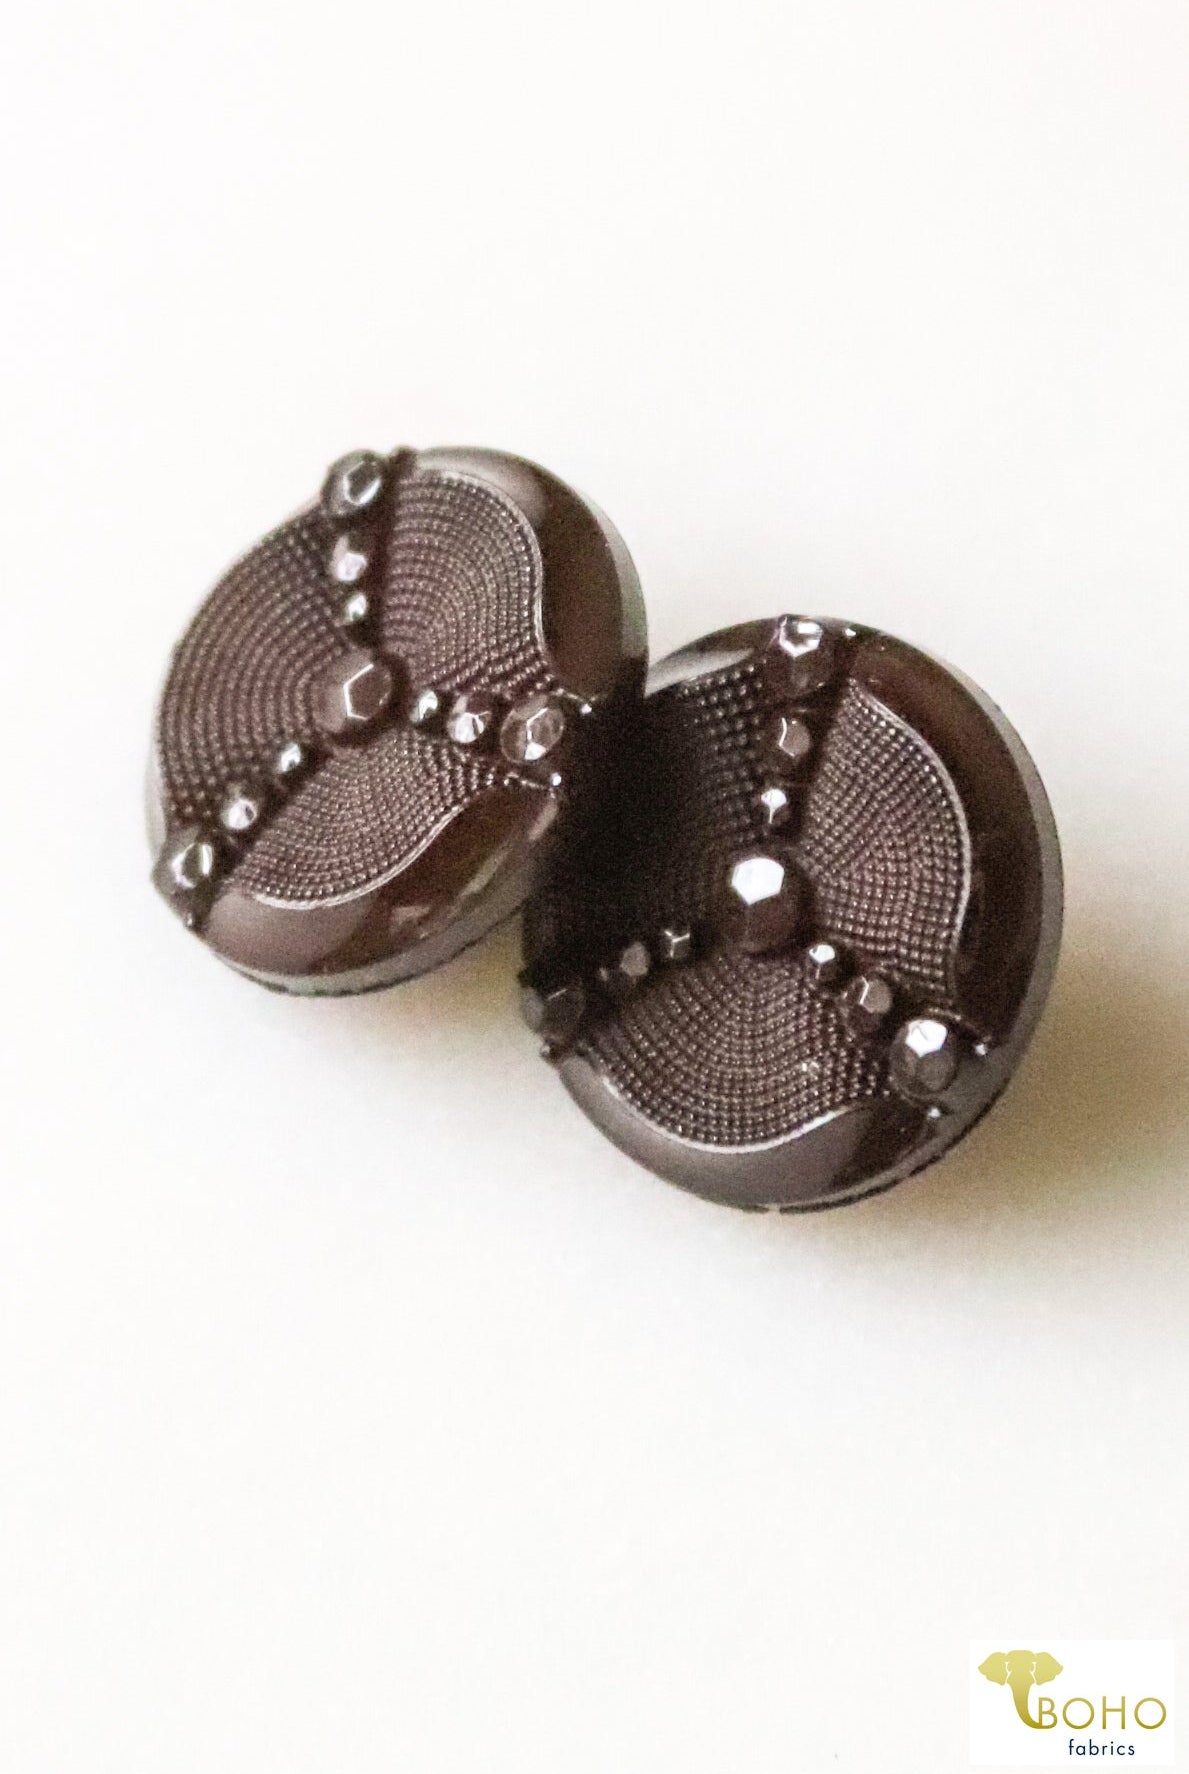 Trinity Faceted Shank Button in Brown. 24L (15mm/0.625 Inches), Package of 8. - Boho Fabrics